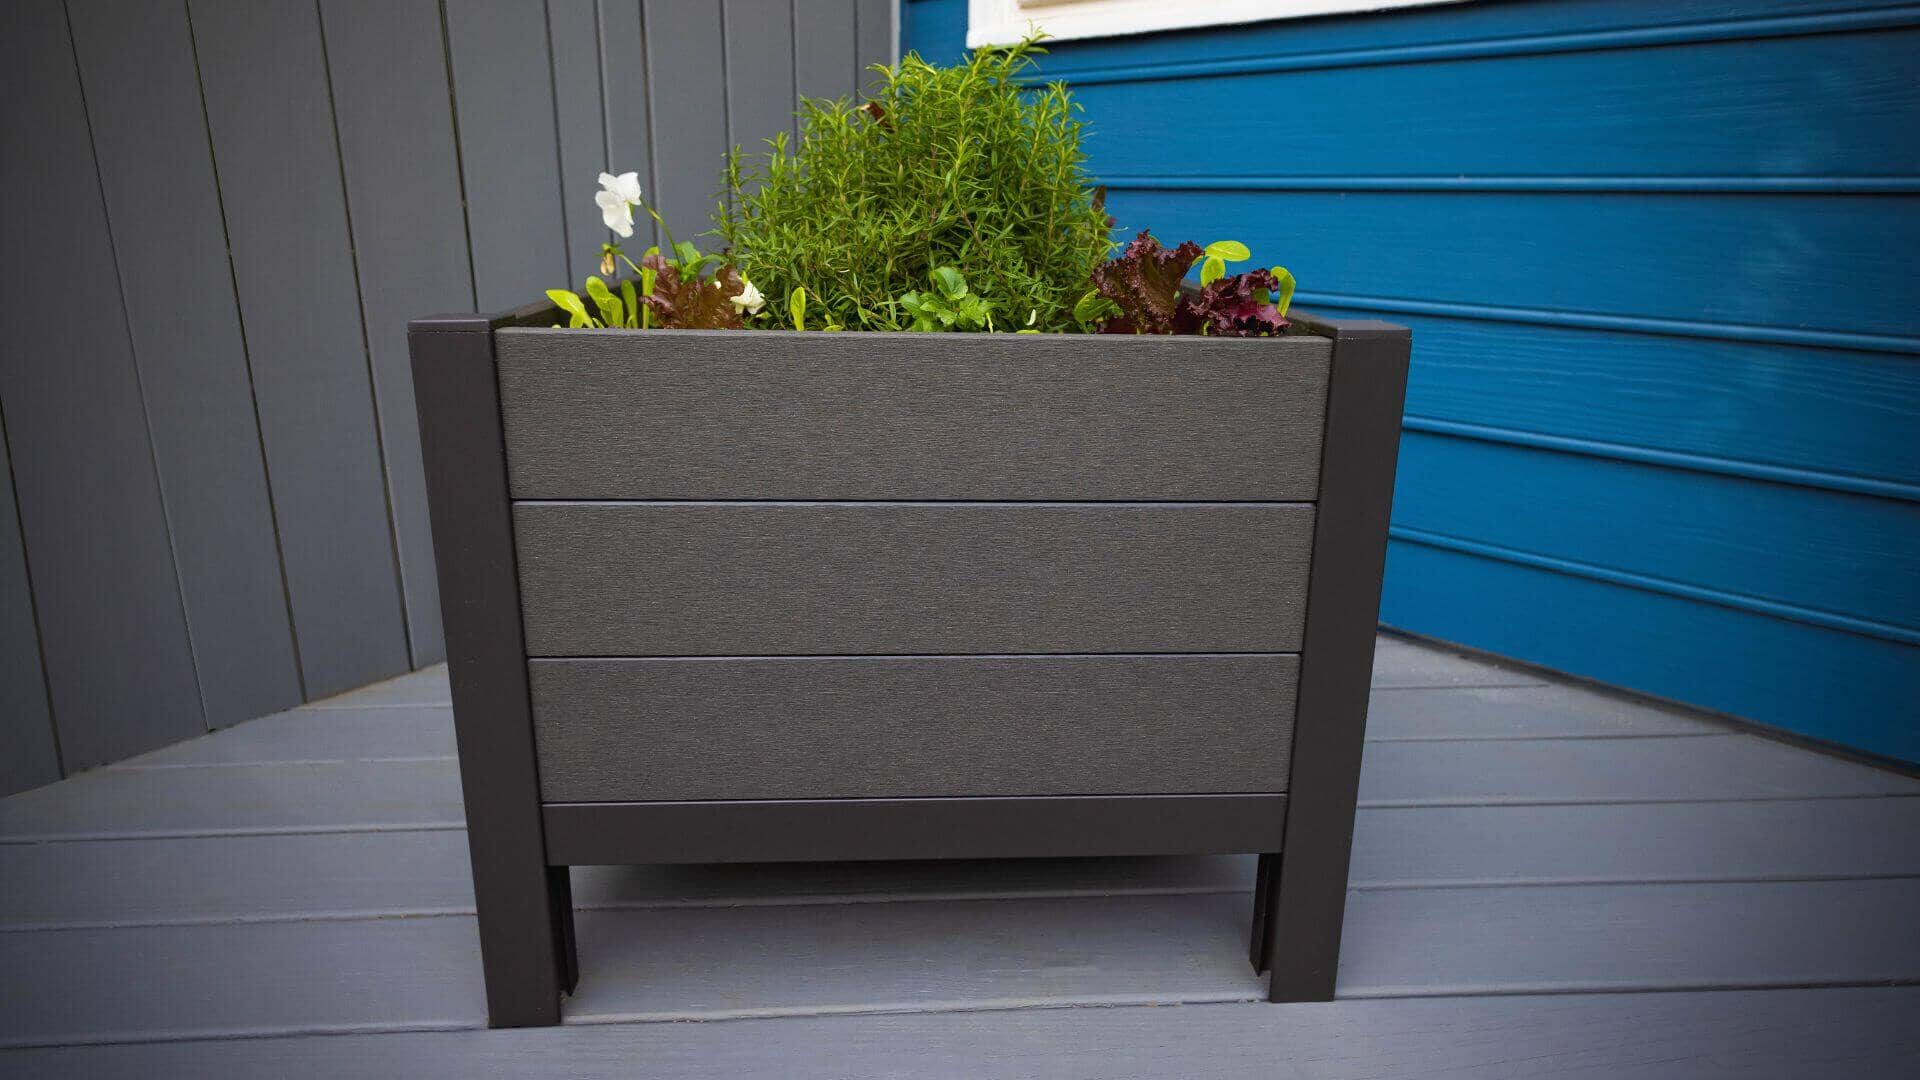 The Urban Oasis (27” x 27” x 22”) Elevated Garden Bed